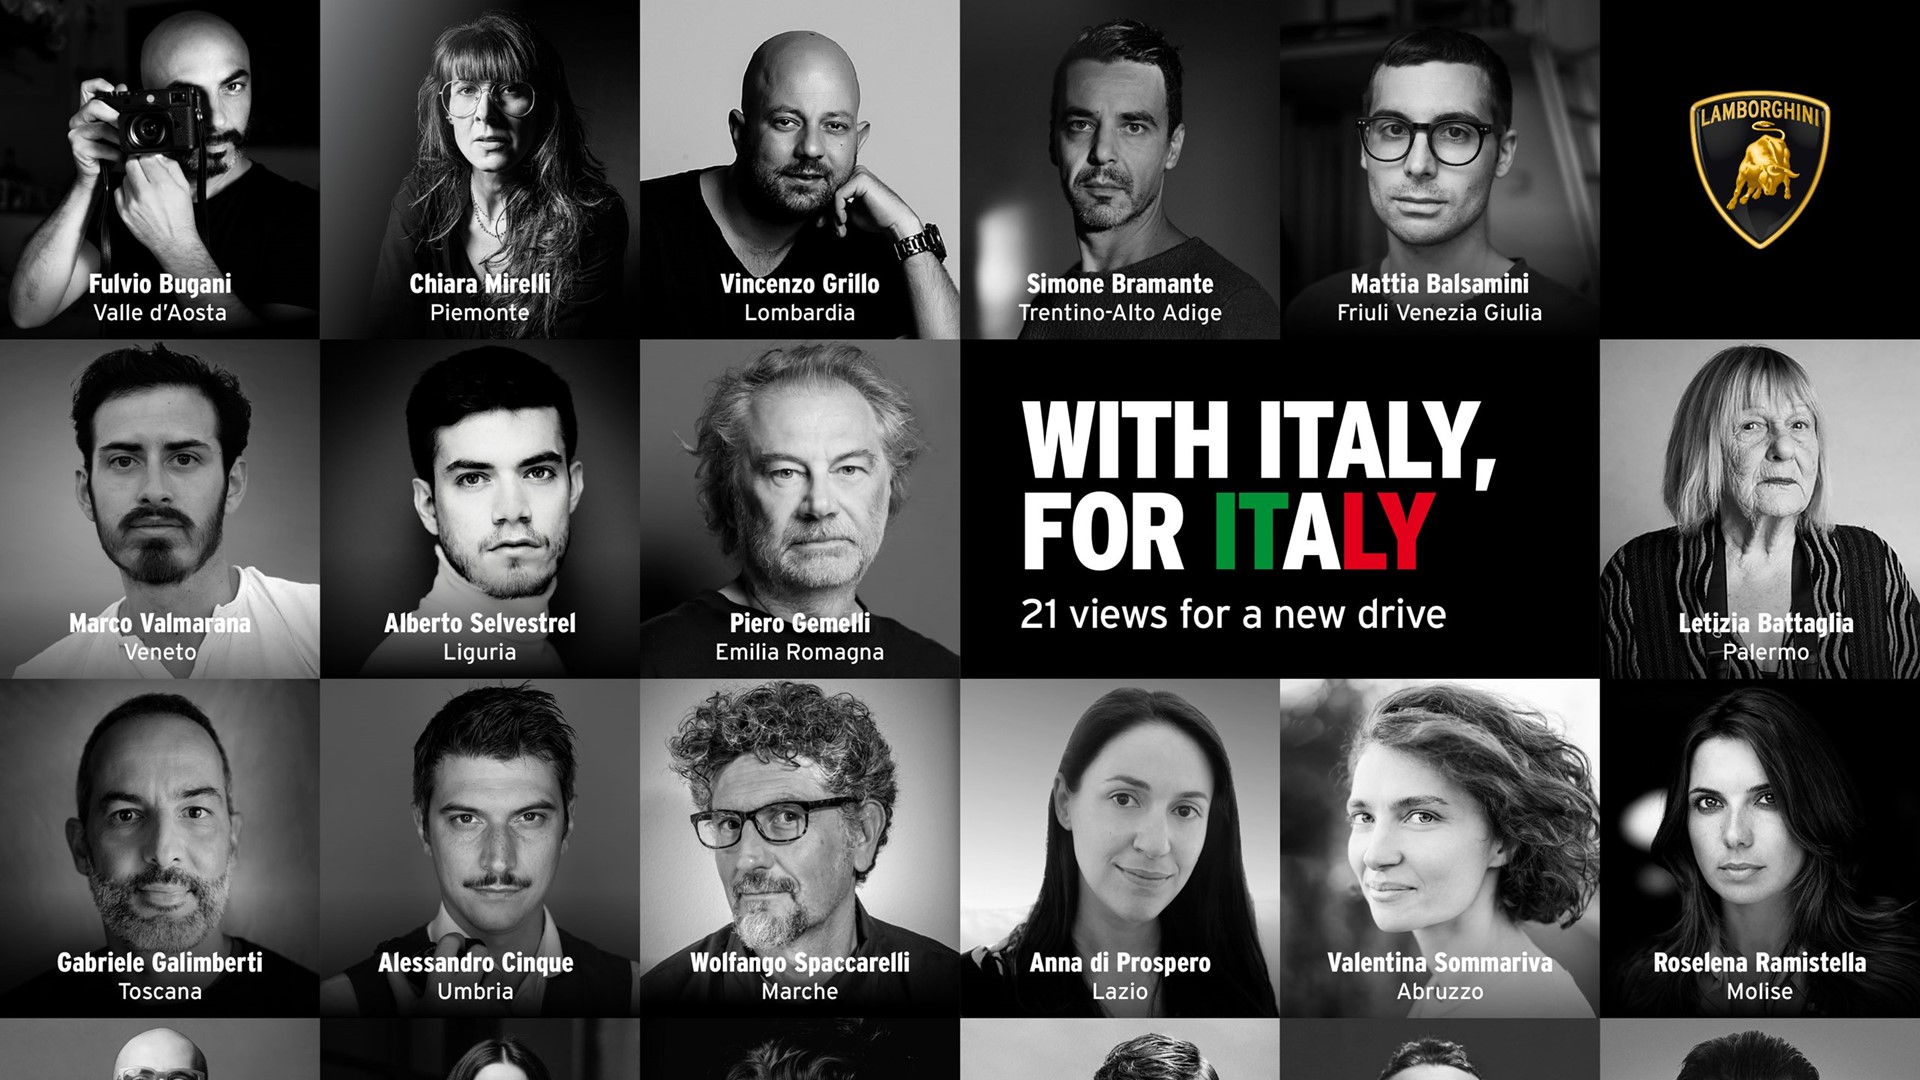 Automobili Lamborghini launches project: “With Italy, For Italy” 20 Italian photographers for 20 regions, plus a cameo by Letizia Battaglia for Palermo, in support of Italy - Image 1